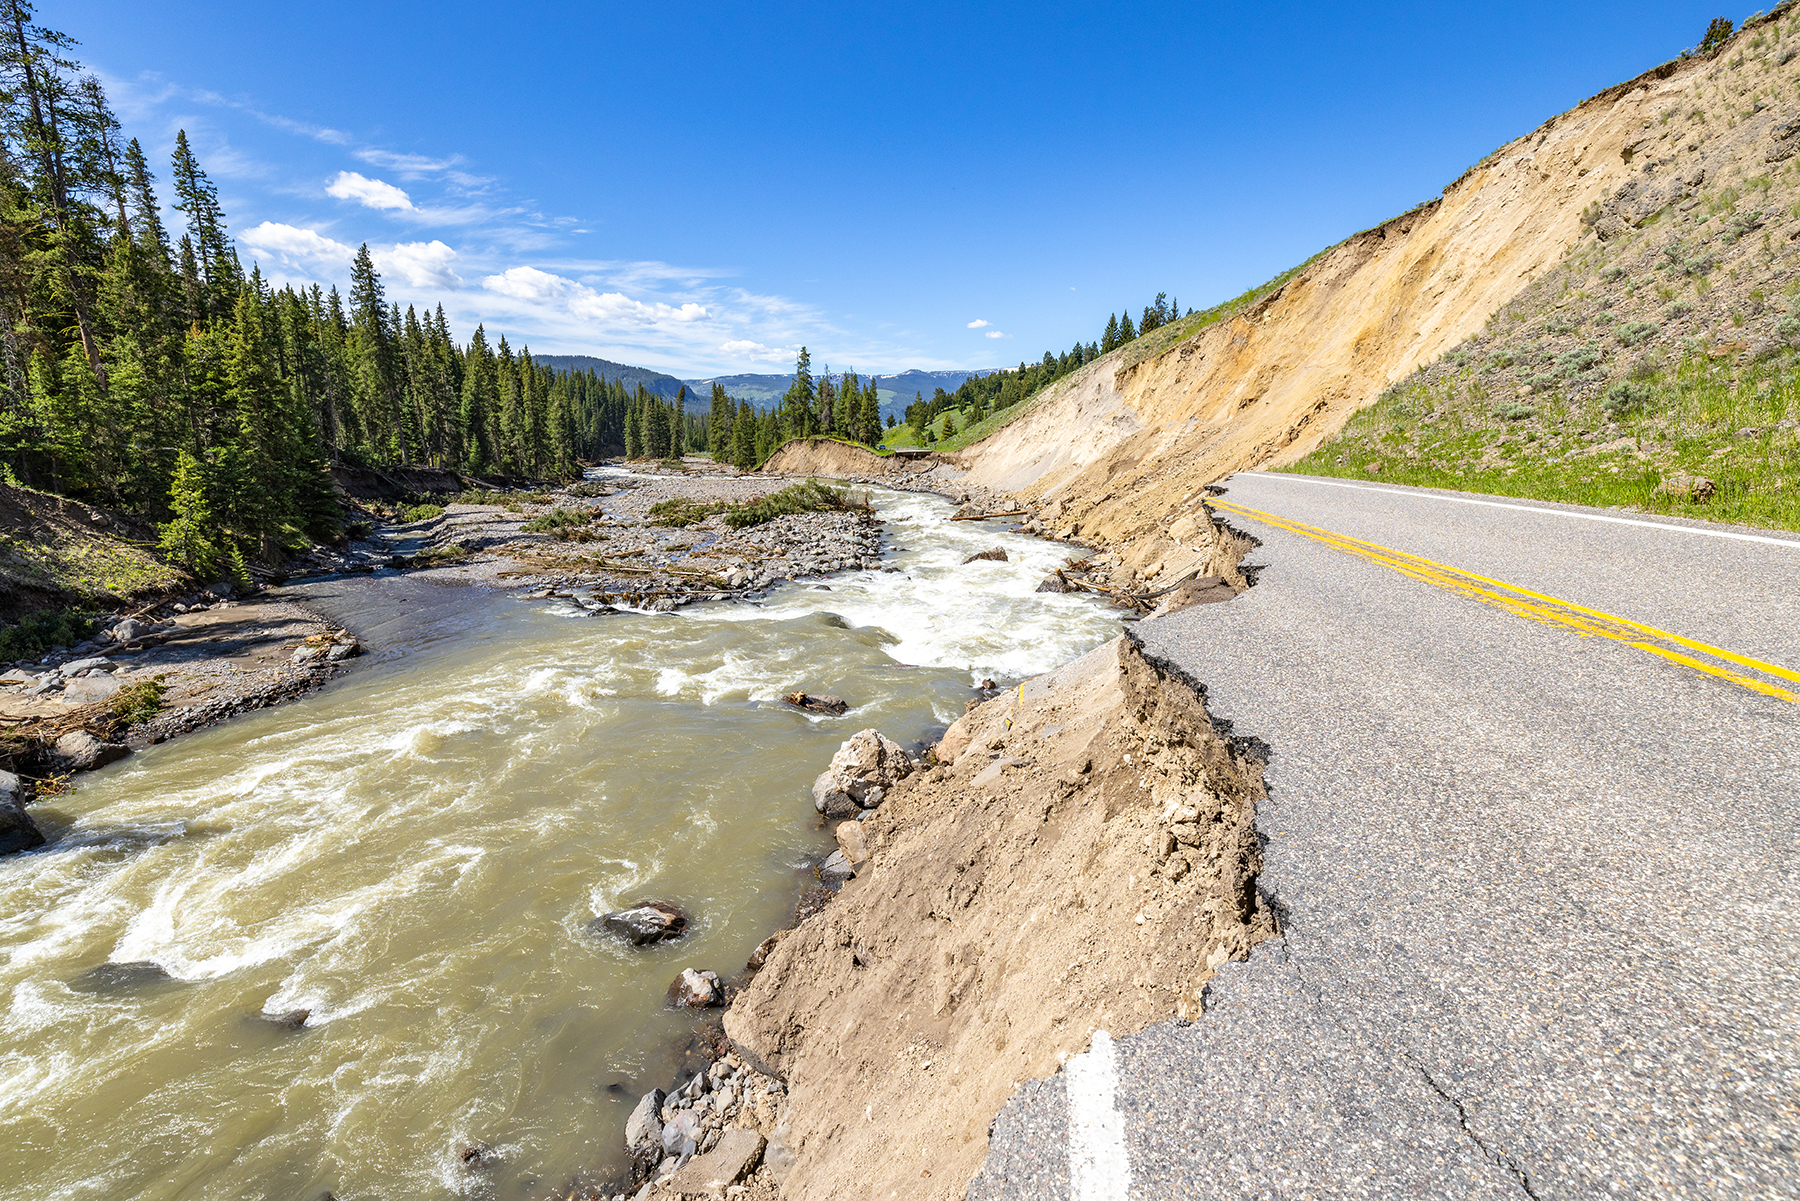 Floodwaters damaged Yellowstone’s Northeast Entrance Road in multiple locations, including this section near the Trout Lake trailhead. (Photograph courtesy of NPS / Jacob W. Frank)